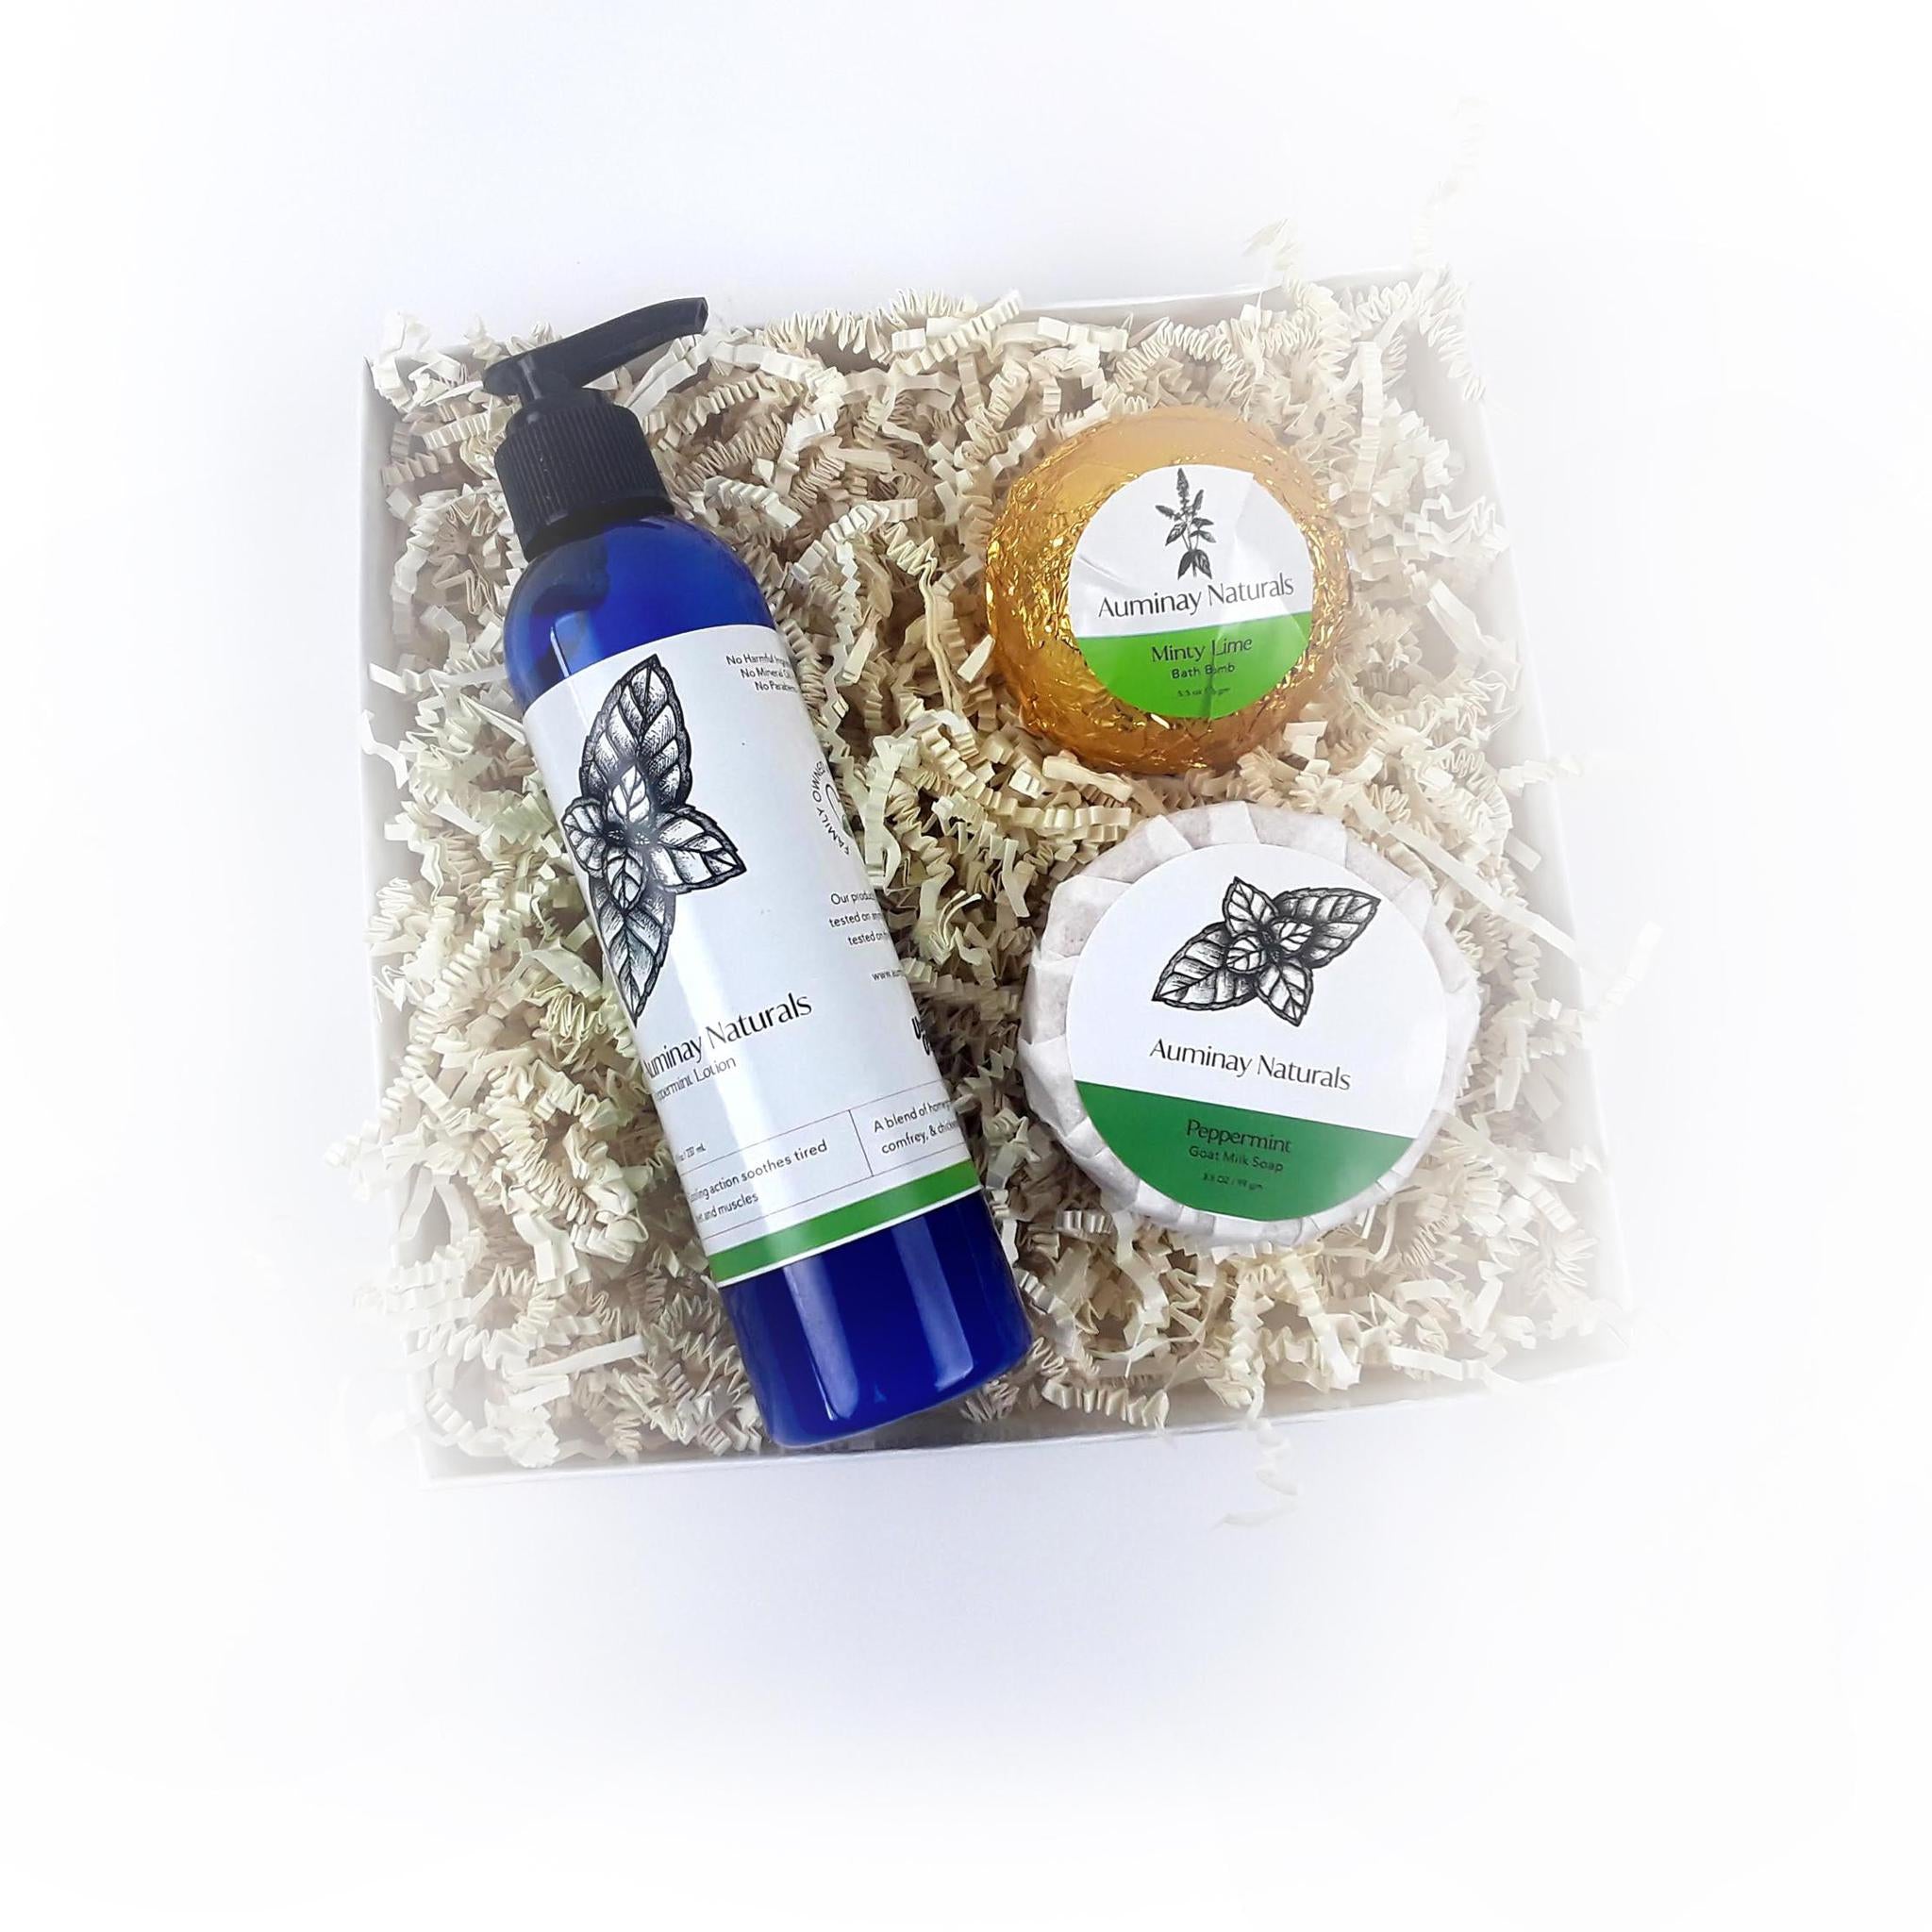 Peppermint Spa Set. Refreshing self care gift with lotion, bath bomb, and goat milk soap from Auminay Naturals.